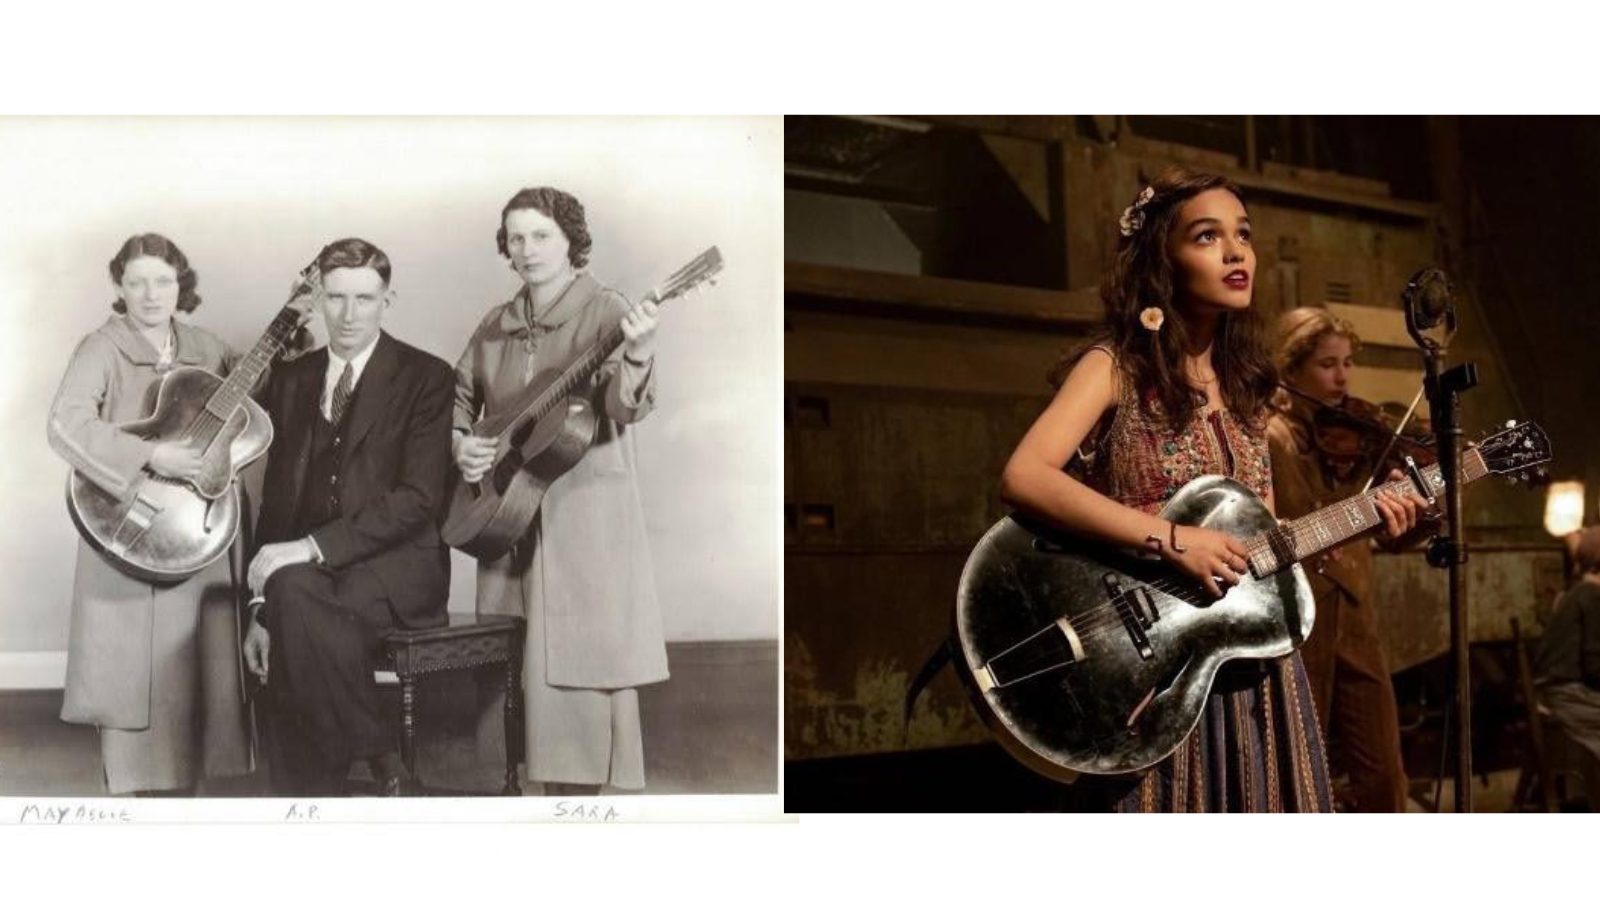 To the left is a promotional black and white photo of the Carter Family holding guitars and facing the camera. AP Carter is seated in the middle sitting on decorative furniture while Maybelle and Sara are standing on both sides of AP. Sarah and Maybelle are both holding guitars. The image on the right features a scene of a young women holding a vintage Gibson guitar and singing on a dimly lit stage, a scene from the recent film. 